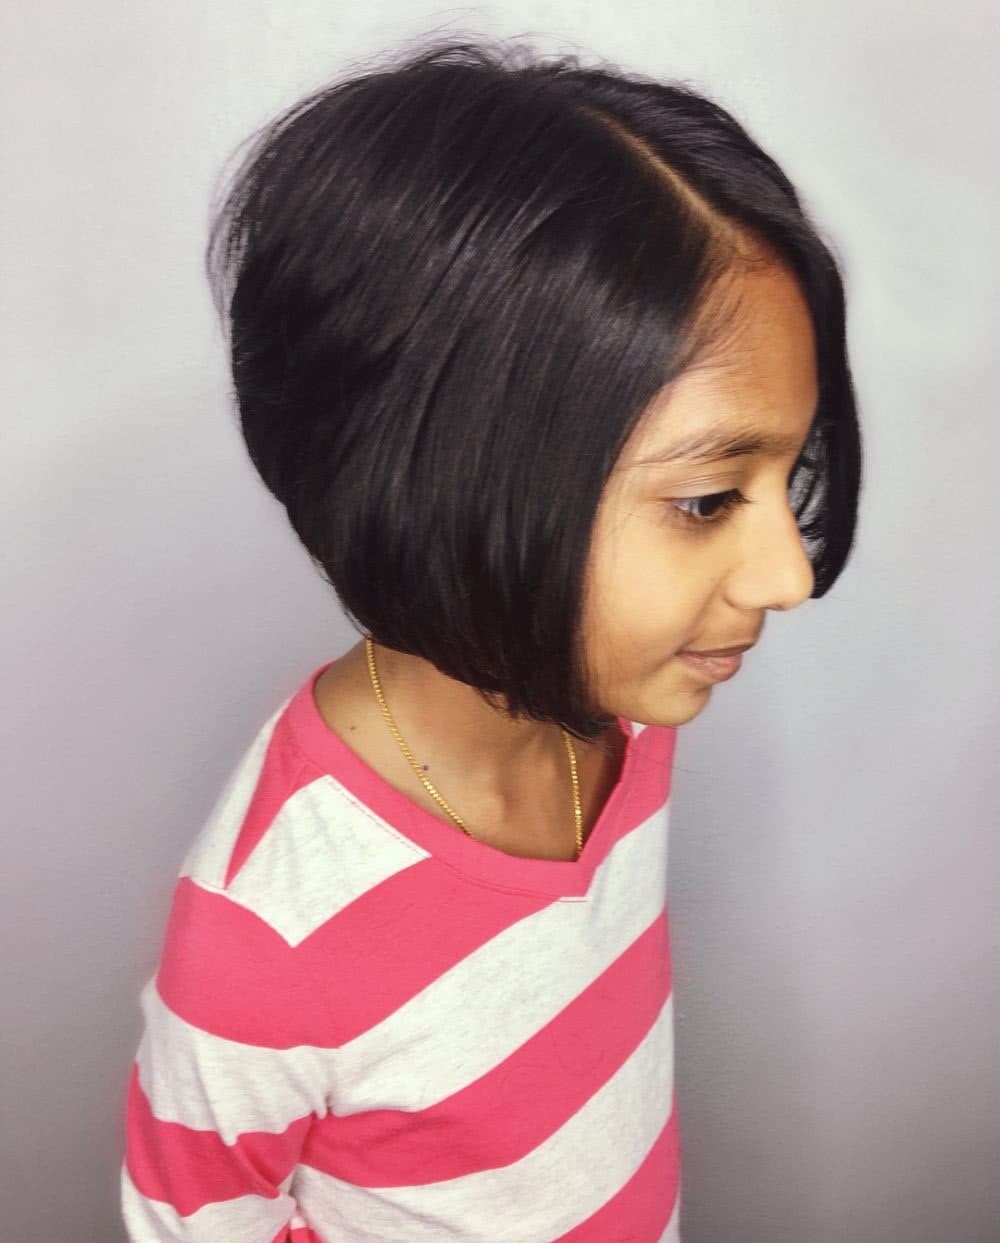 Pictures Of Little Girls Haircuts
 25 Cute and Adorable Little Girl Haircuts Haircuts